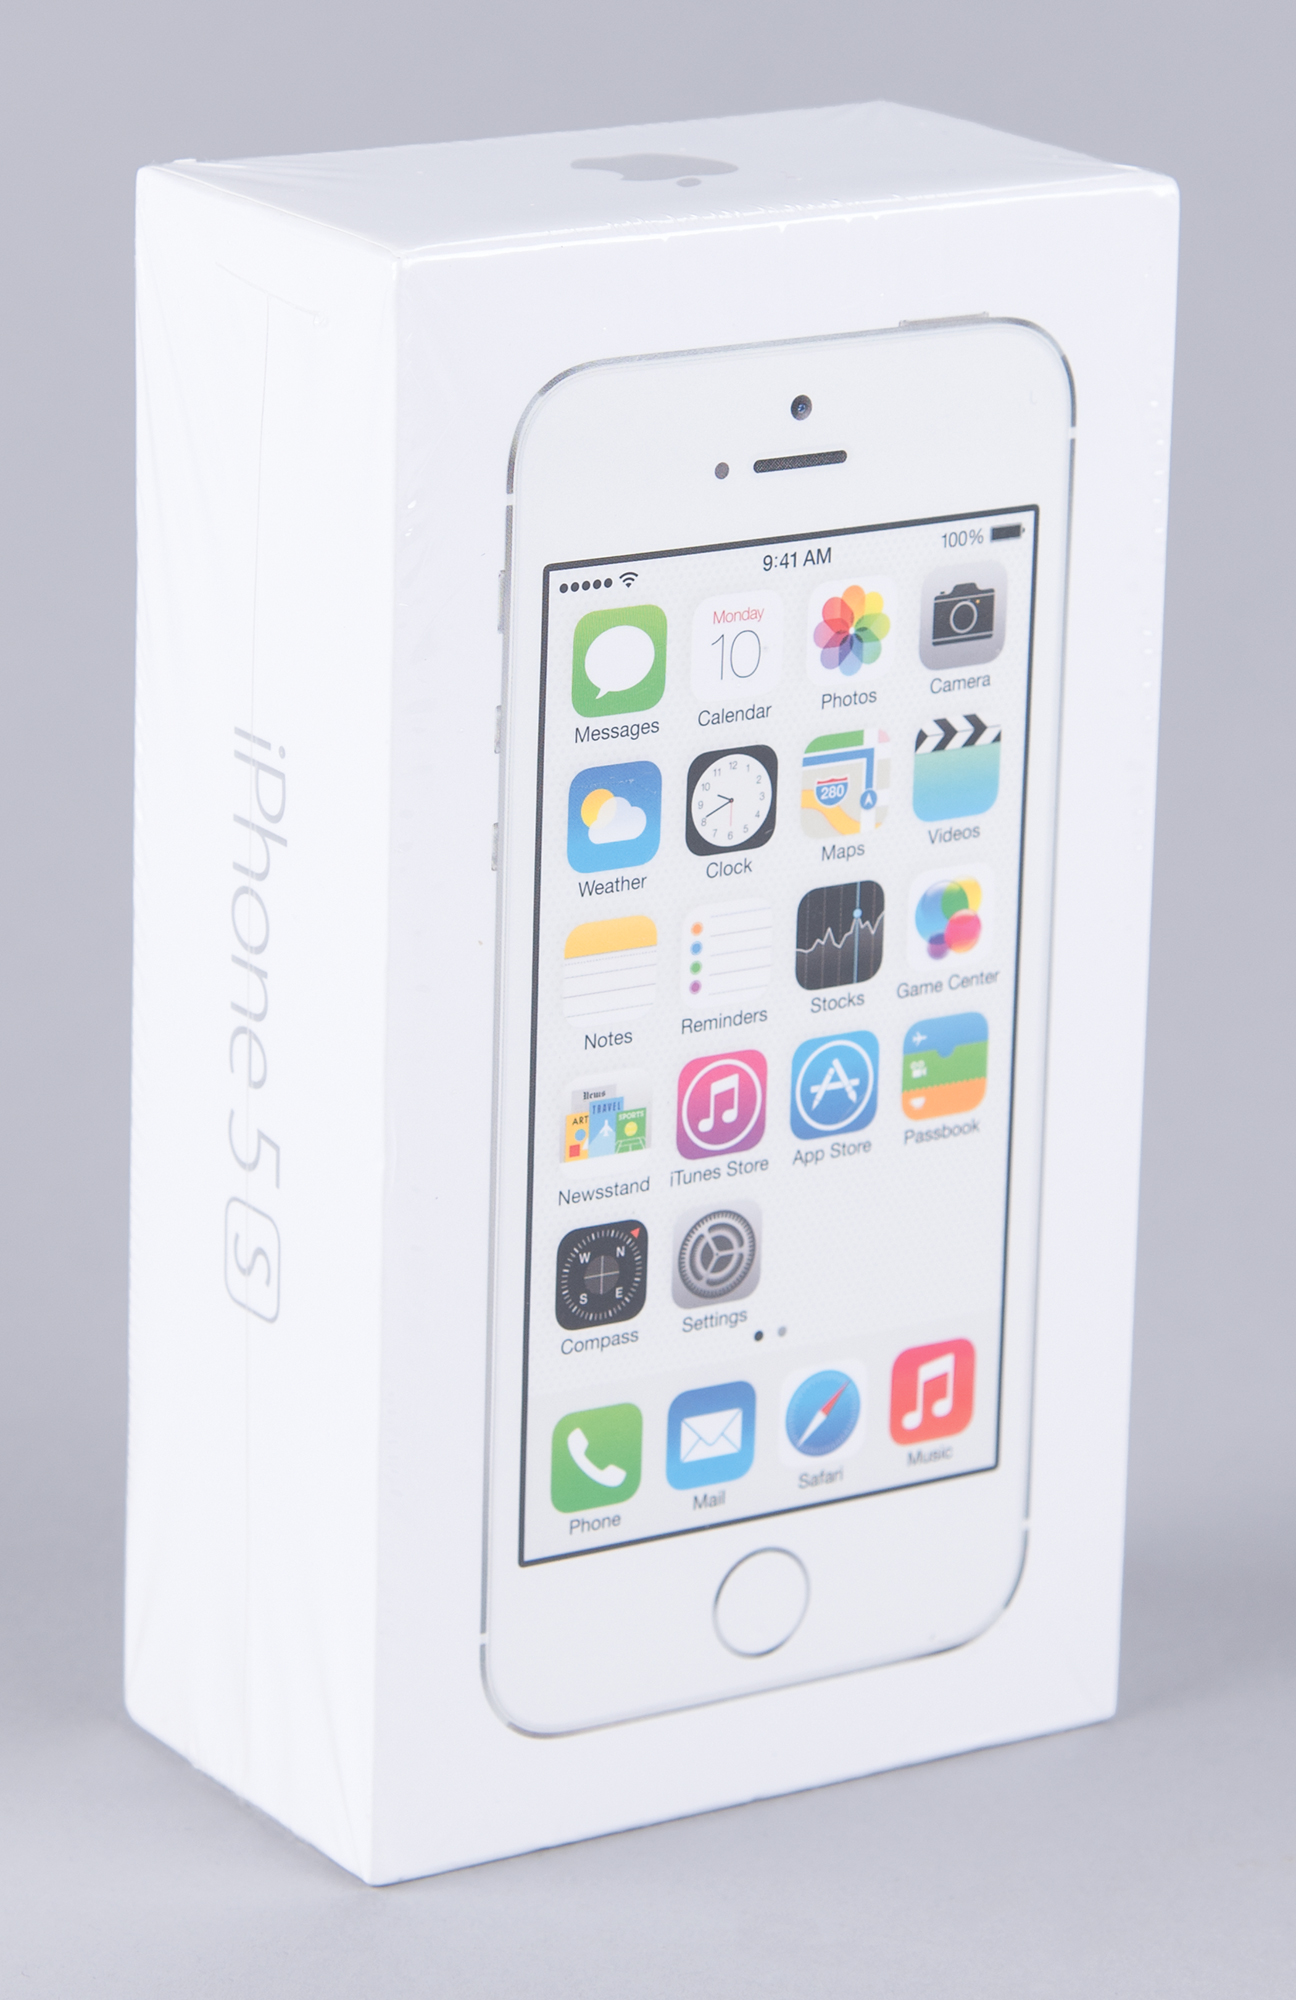 Apple iPhone 5s (7th Generation, Sealed - 16GB) White/Silver Version |